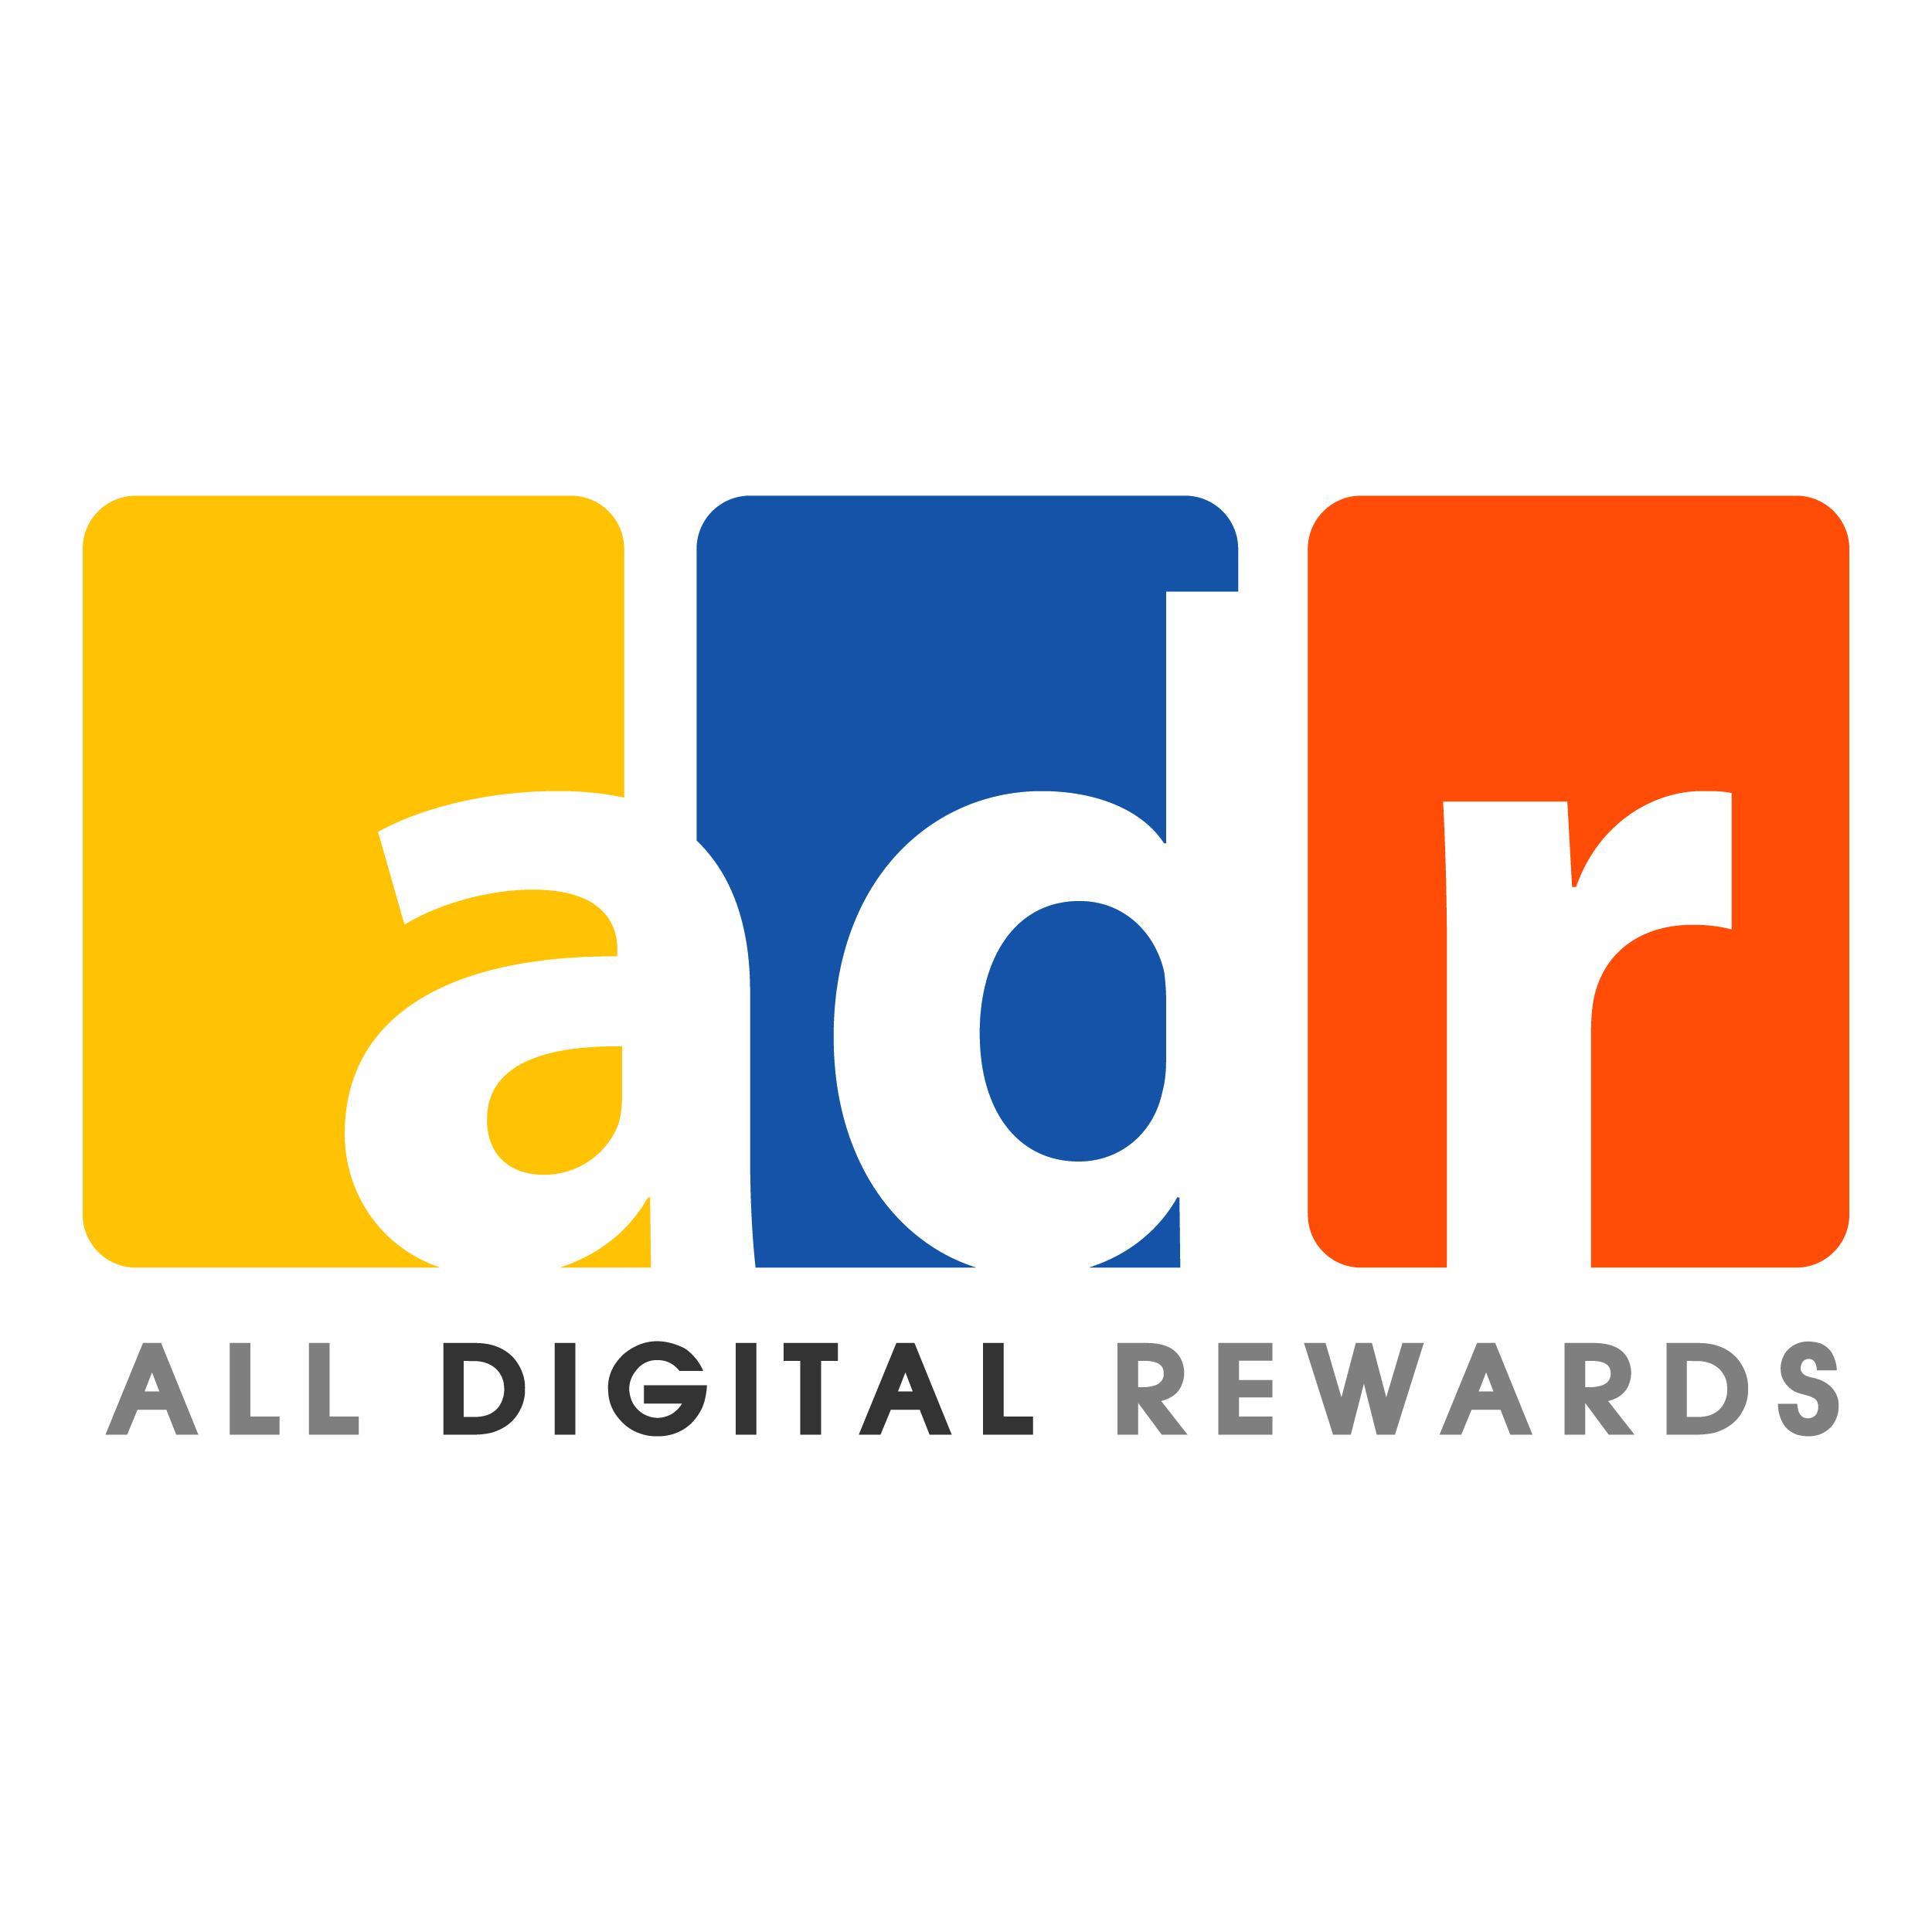 Industy leader in
#loyaltysoftware #incentives #rewards #API #prepaidcards #egiftcards #rebatefulfillment #survey #recognition 
#channel #sales #sweepstakes